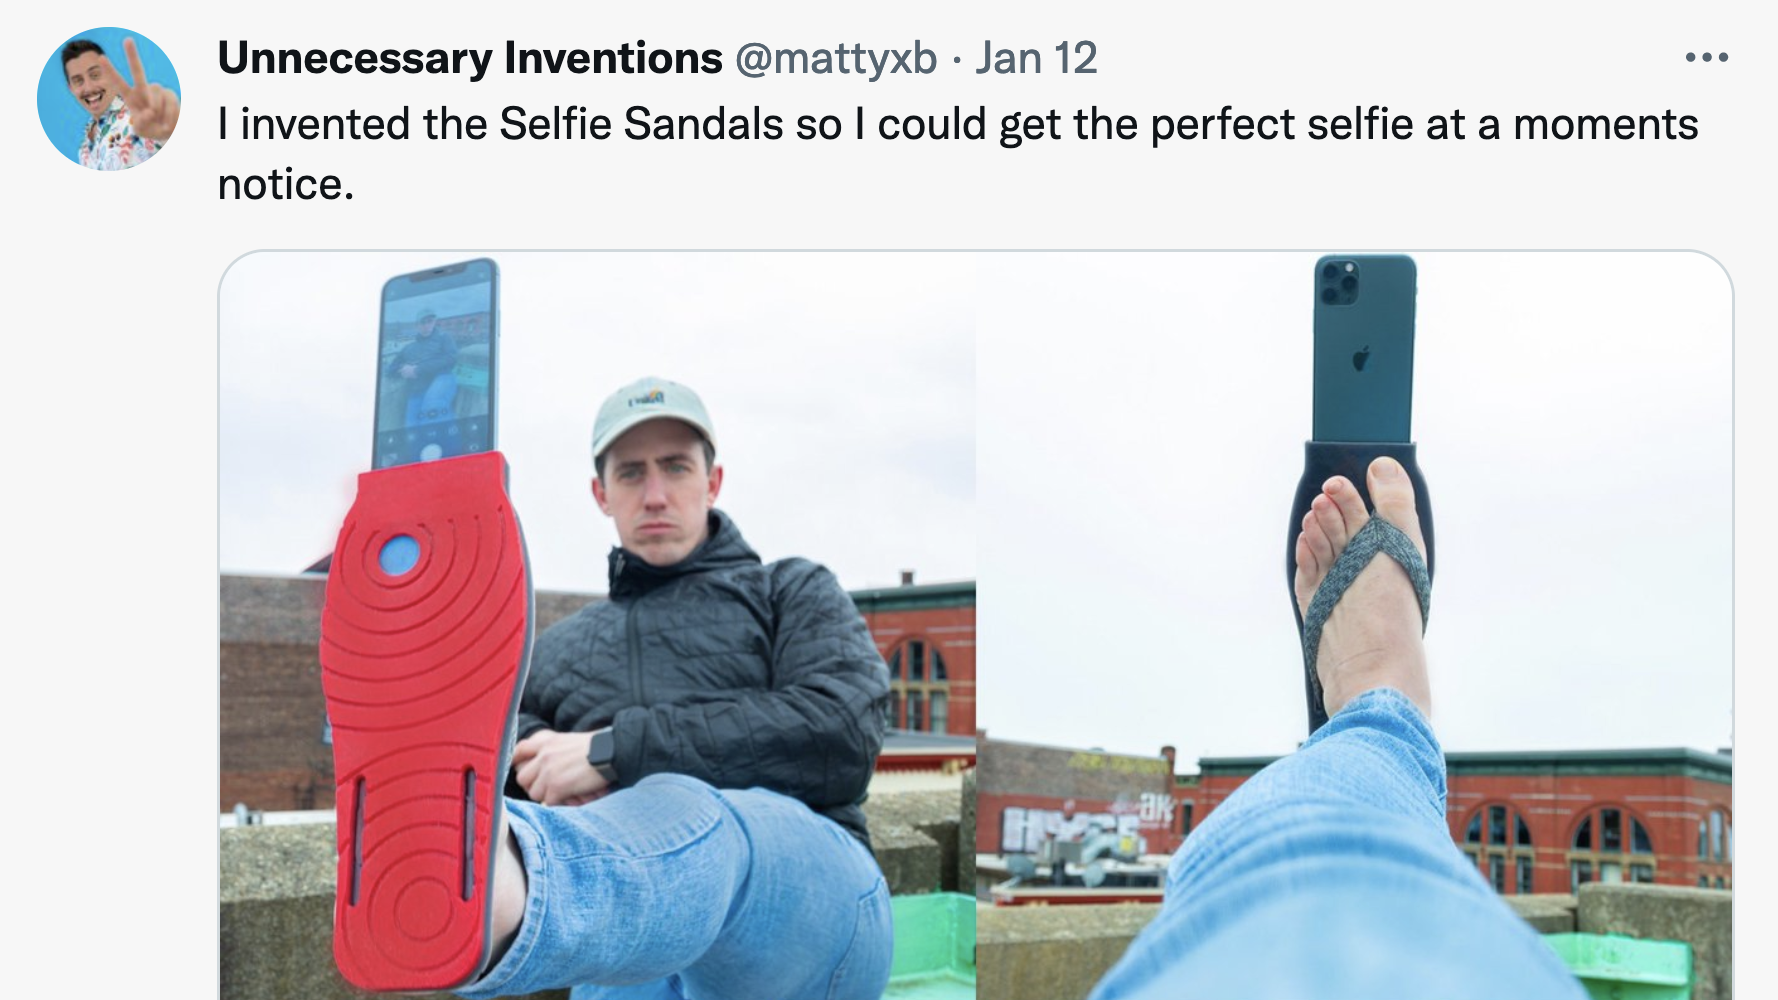 Tweet: "I invented the Selfie Sandals so I could get the perfect selfie at a moments notice." including pictures of a guy taking selfies with his feet.